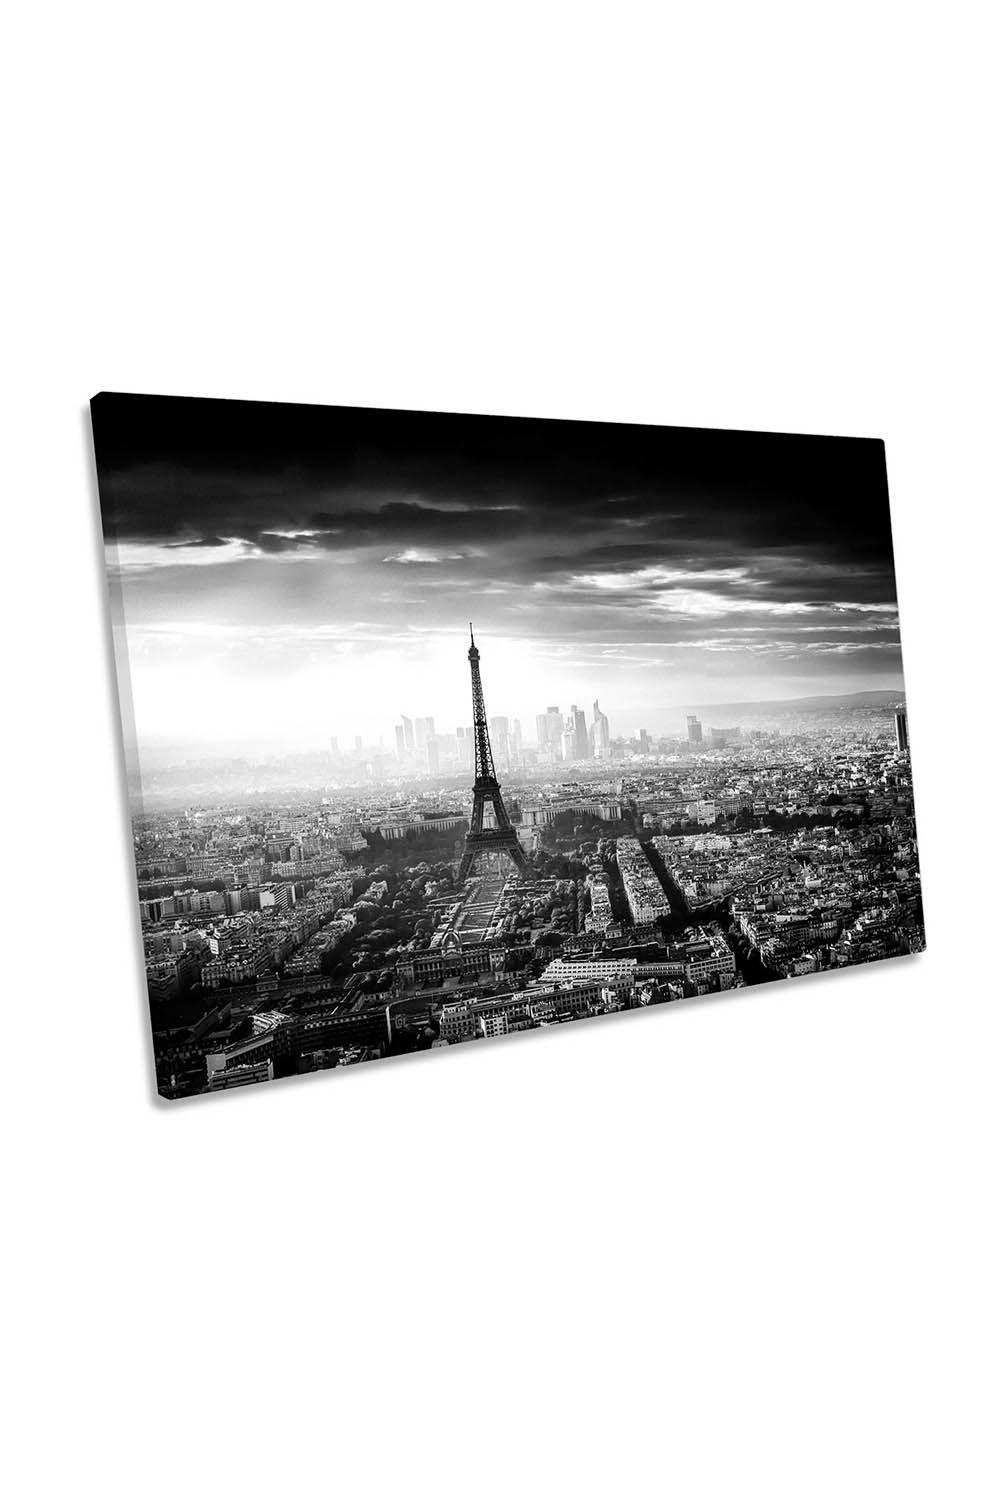 Paris City Skyline Black and White Canvas Wall Art Picture Print